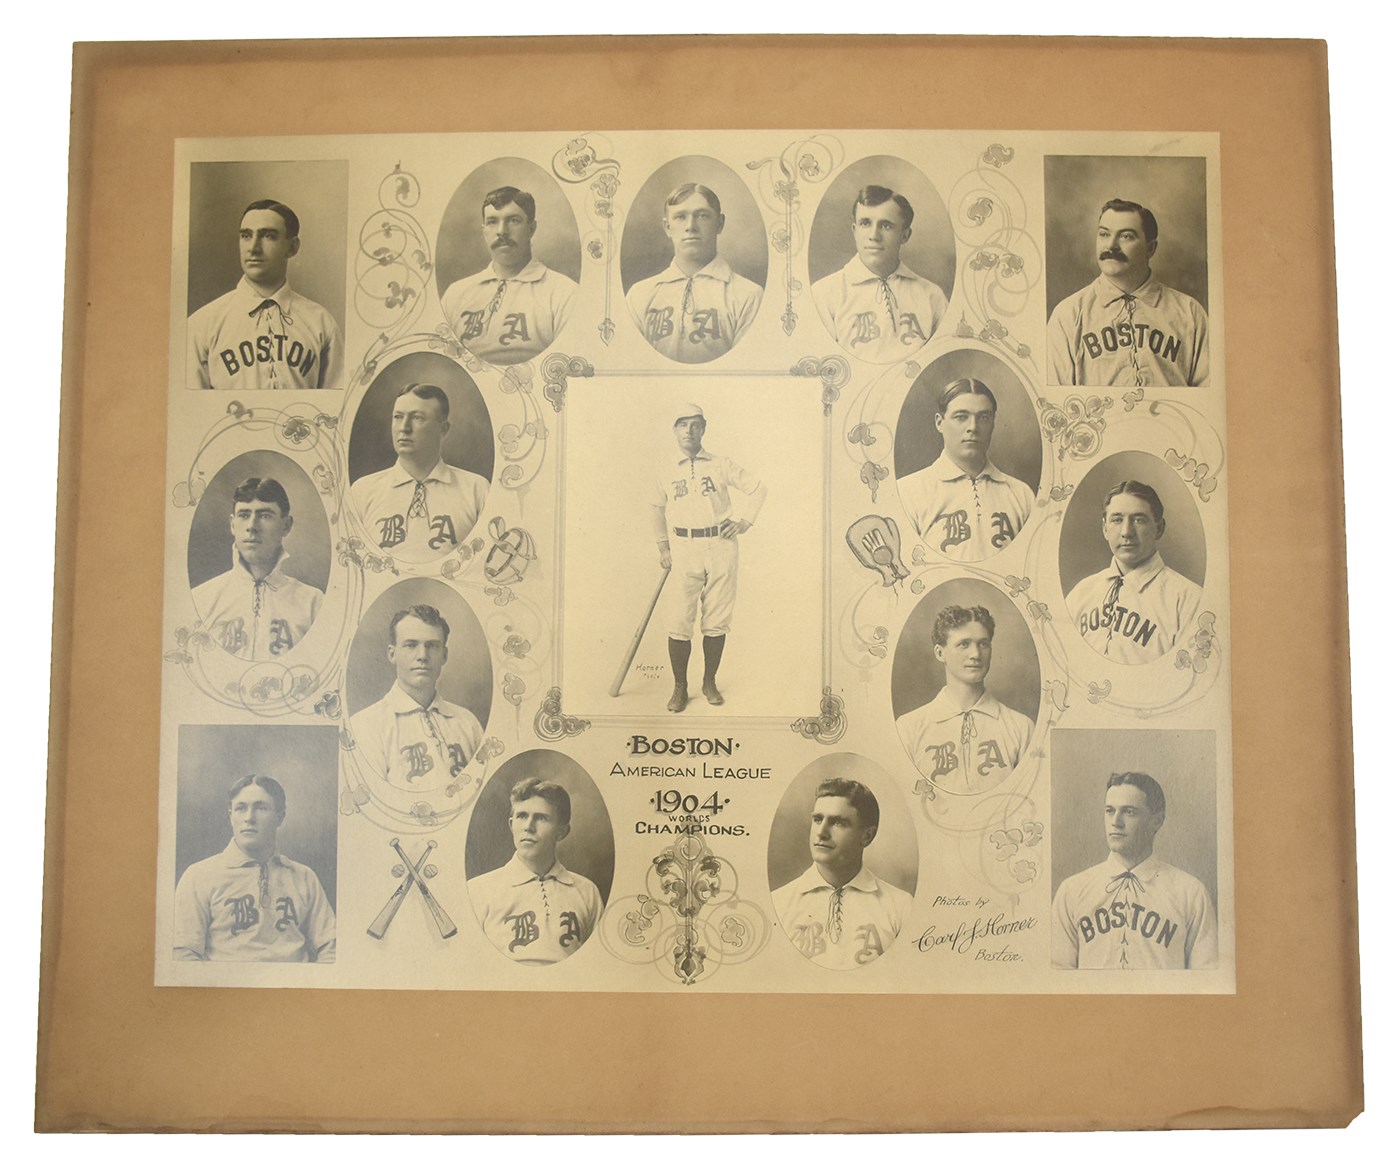 Best of the Best - 1903 First World Series Champion Boston Red Sox Imperial Cabinet by Carl Horner - The Holy Grail of Baseball Photography